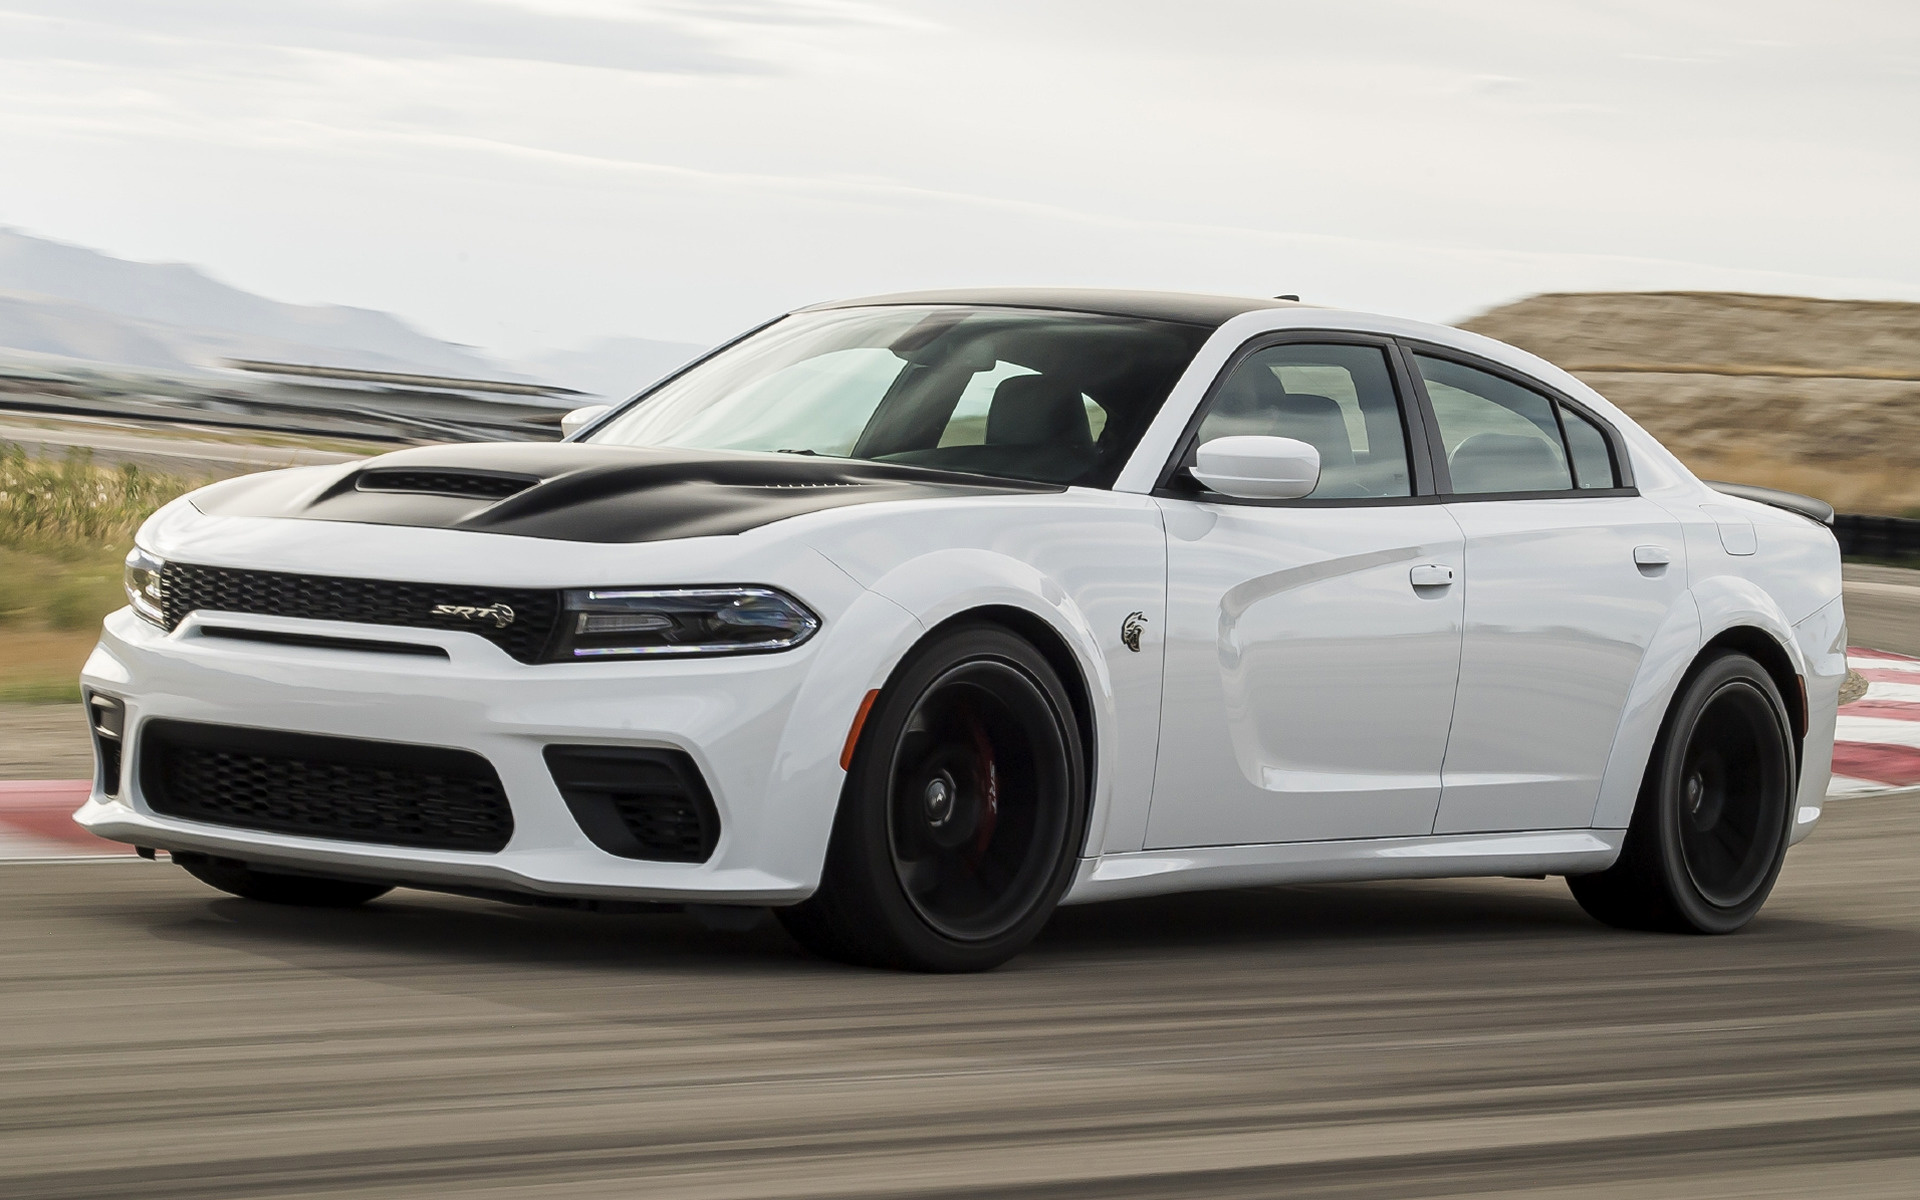 2021 Dodge Charger SRT Hellcat Redeye Widebody - Wallpapers and HD